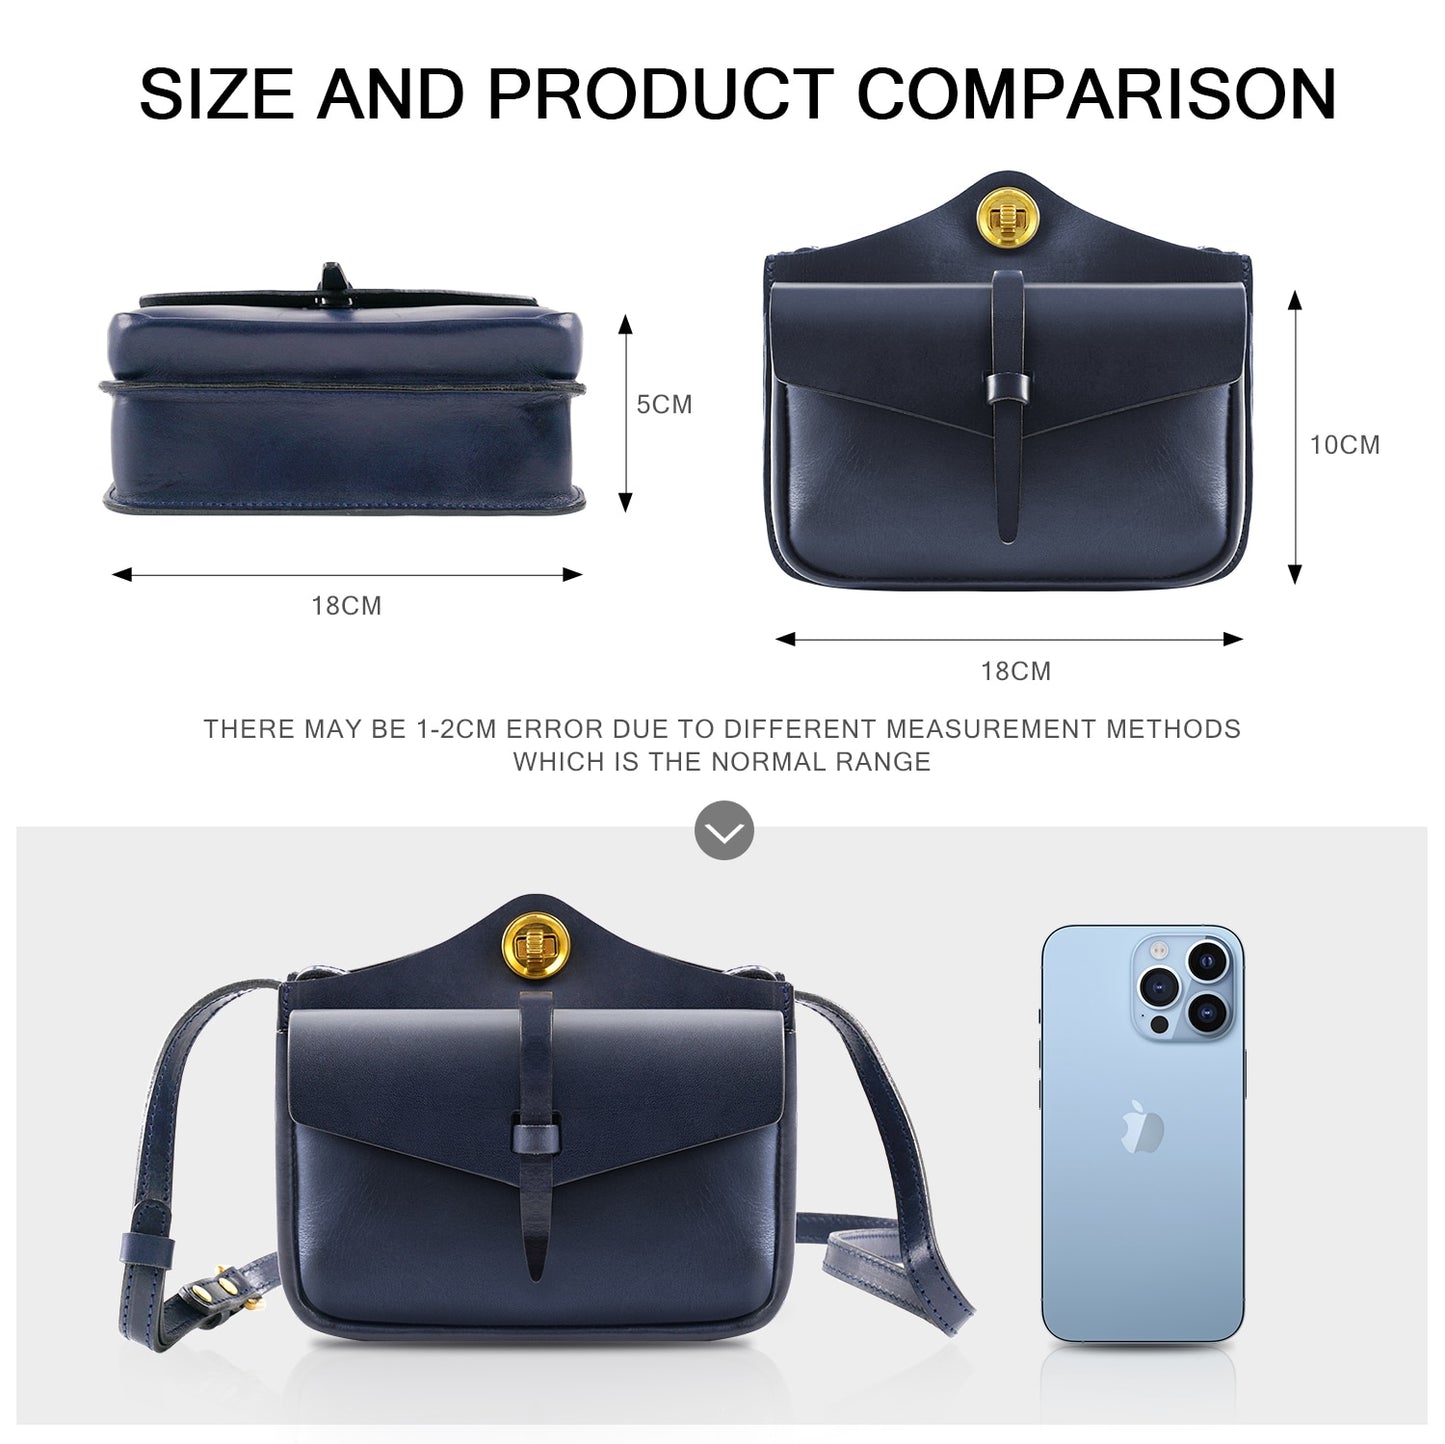 ANGENGRUI First Layer Cowhide women&#39;s Bag Simple and Exquisite Shoulder Bag Handmade Messenger Bag